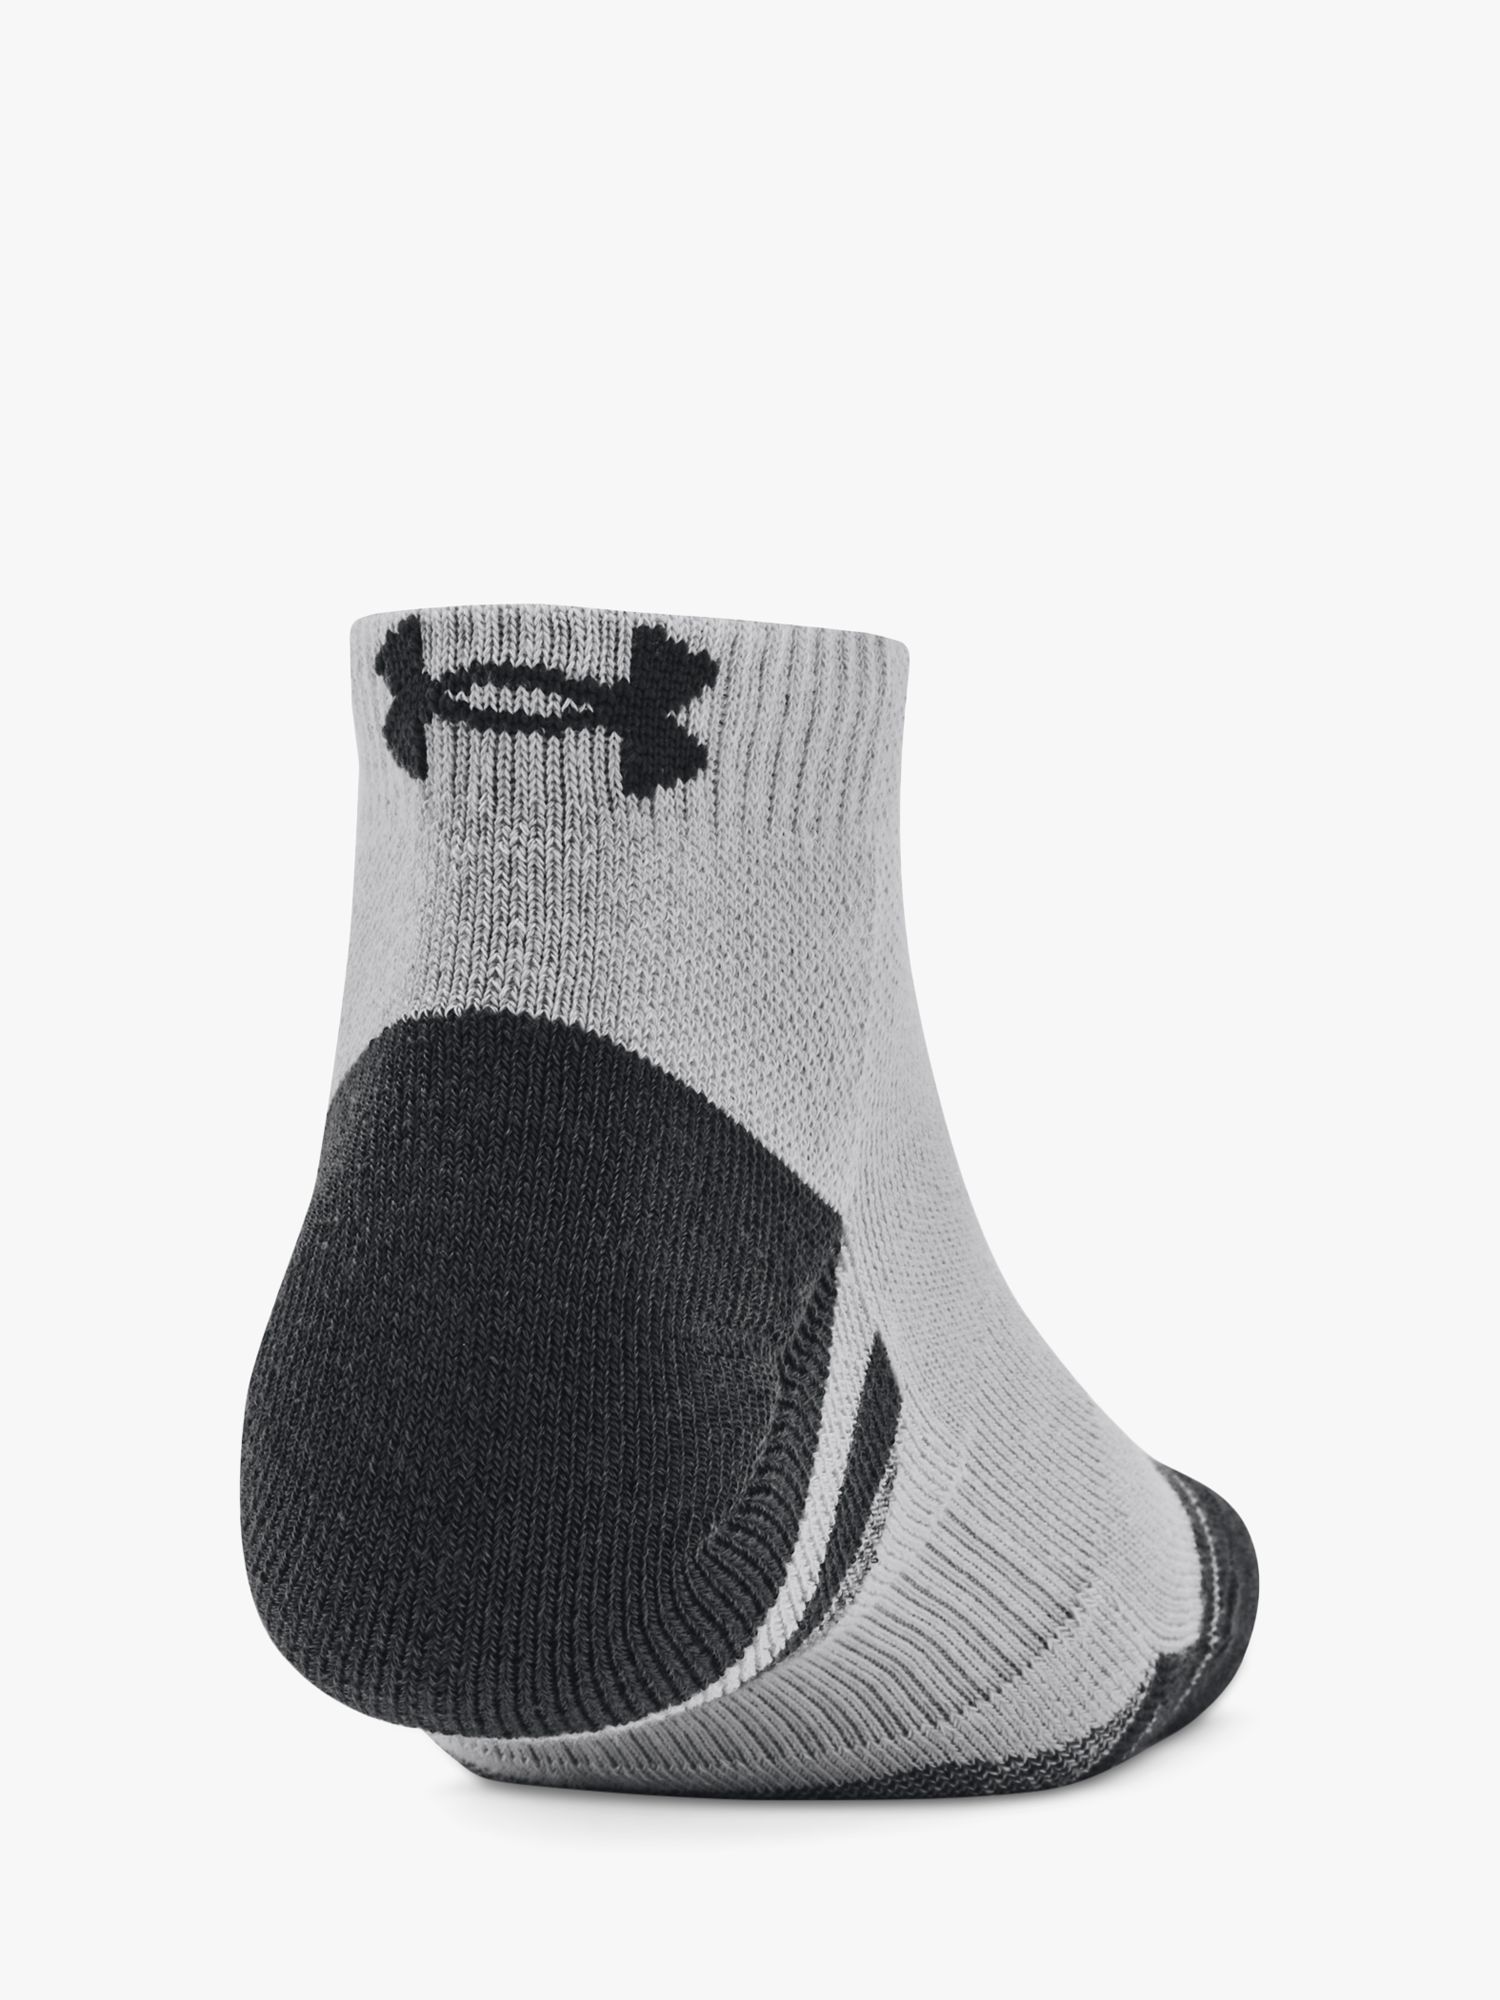 Buy Under Armour Performance Tech Low Cut Socks, Pack of 3, Mod Gray/White/Jet Gray Online at johnlewis.com